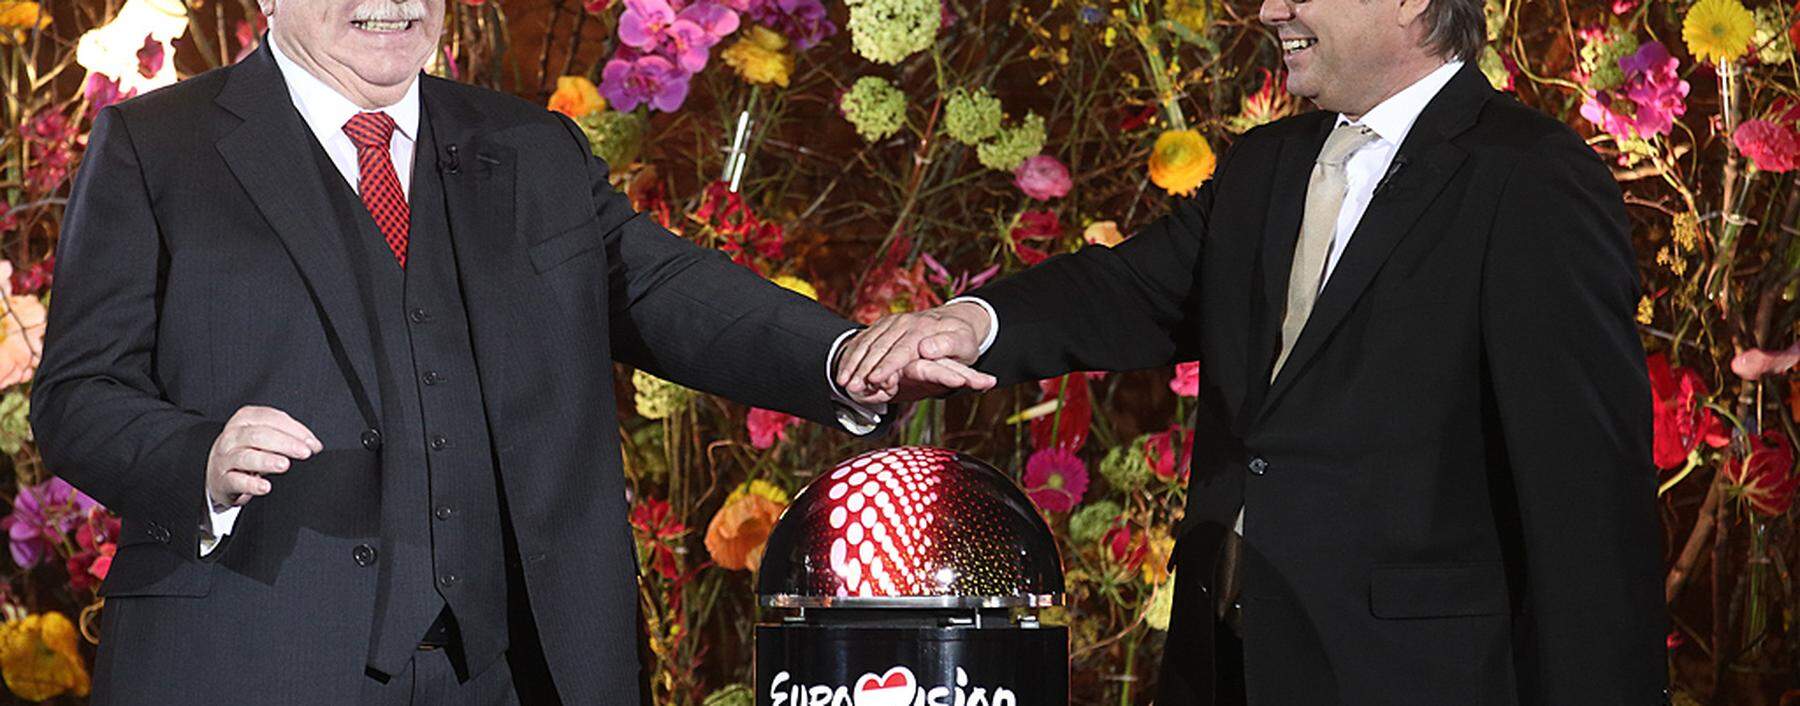 Vienna´s Mayor Haeupl and Austrian state broadcaster ORF head Wrabetz prepare to push the button starting a countdown clock for the Eurovision Song Contest in Vienna